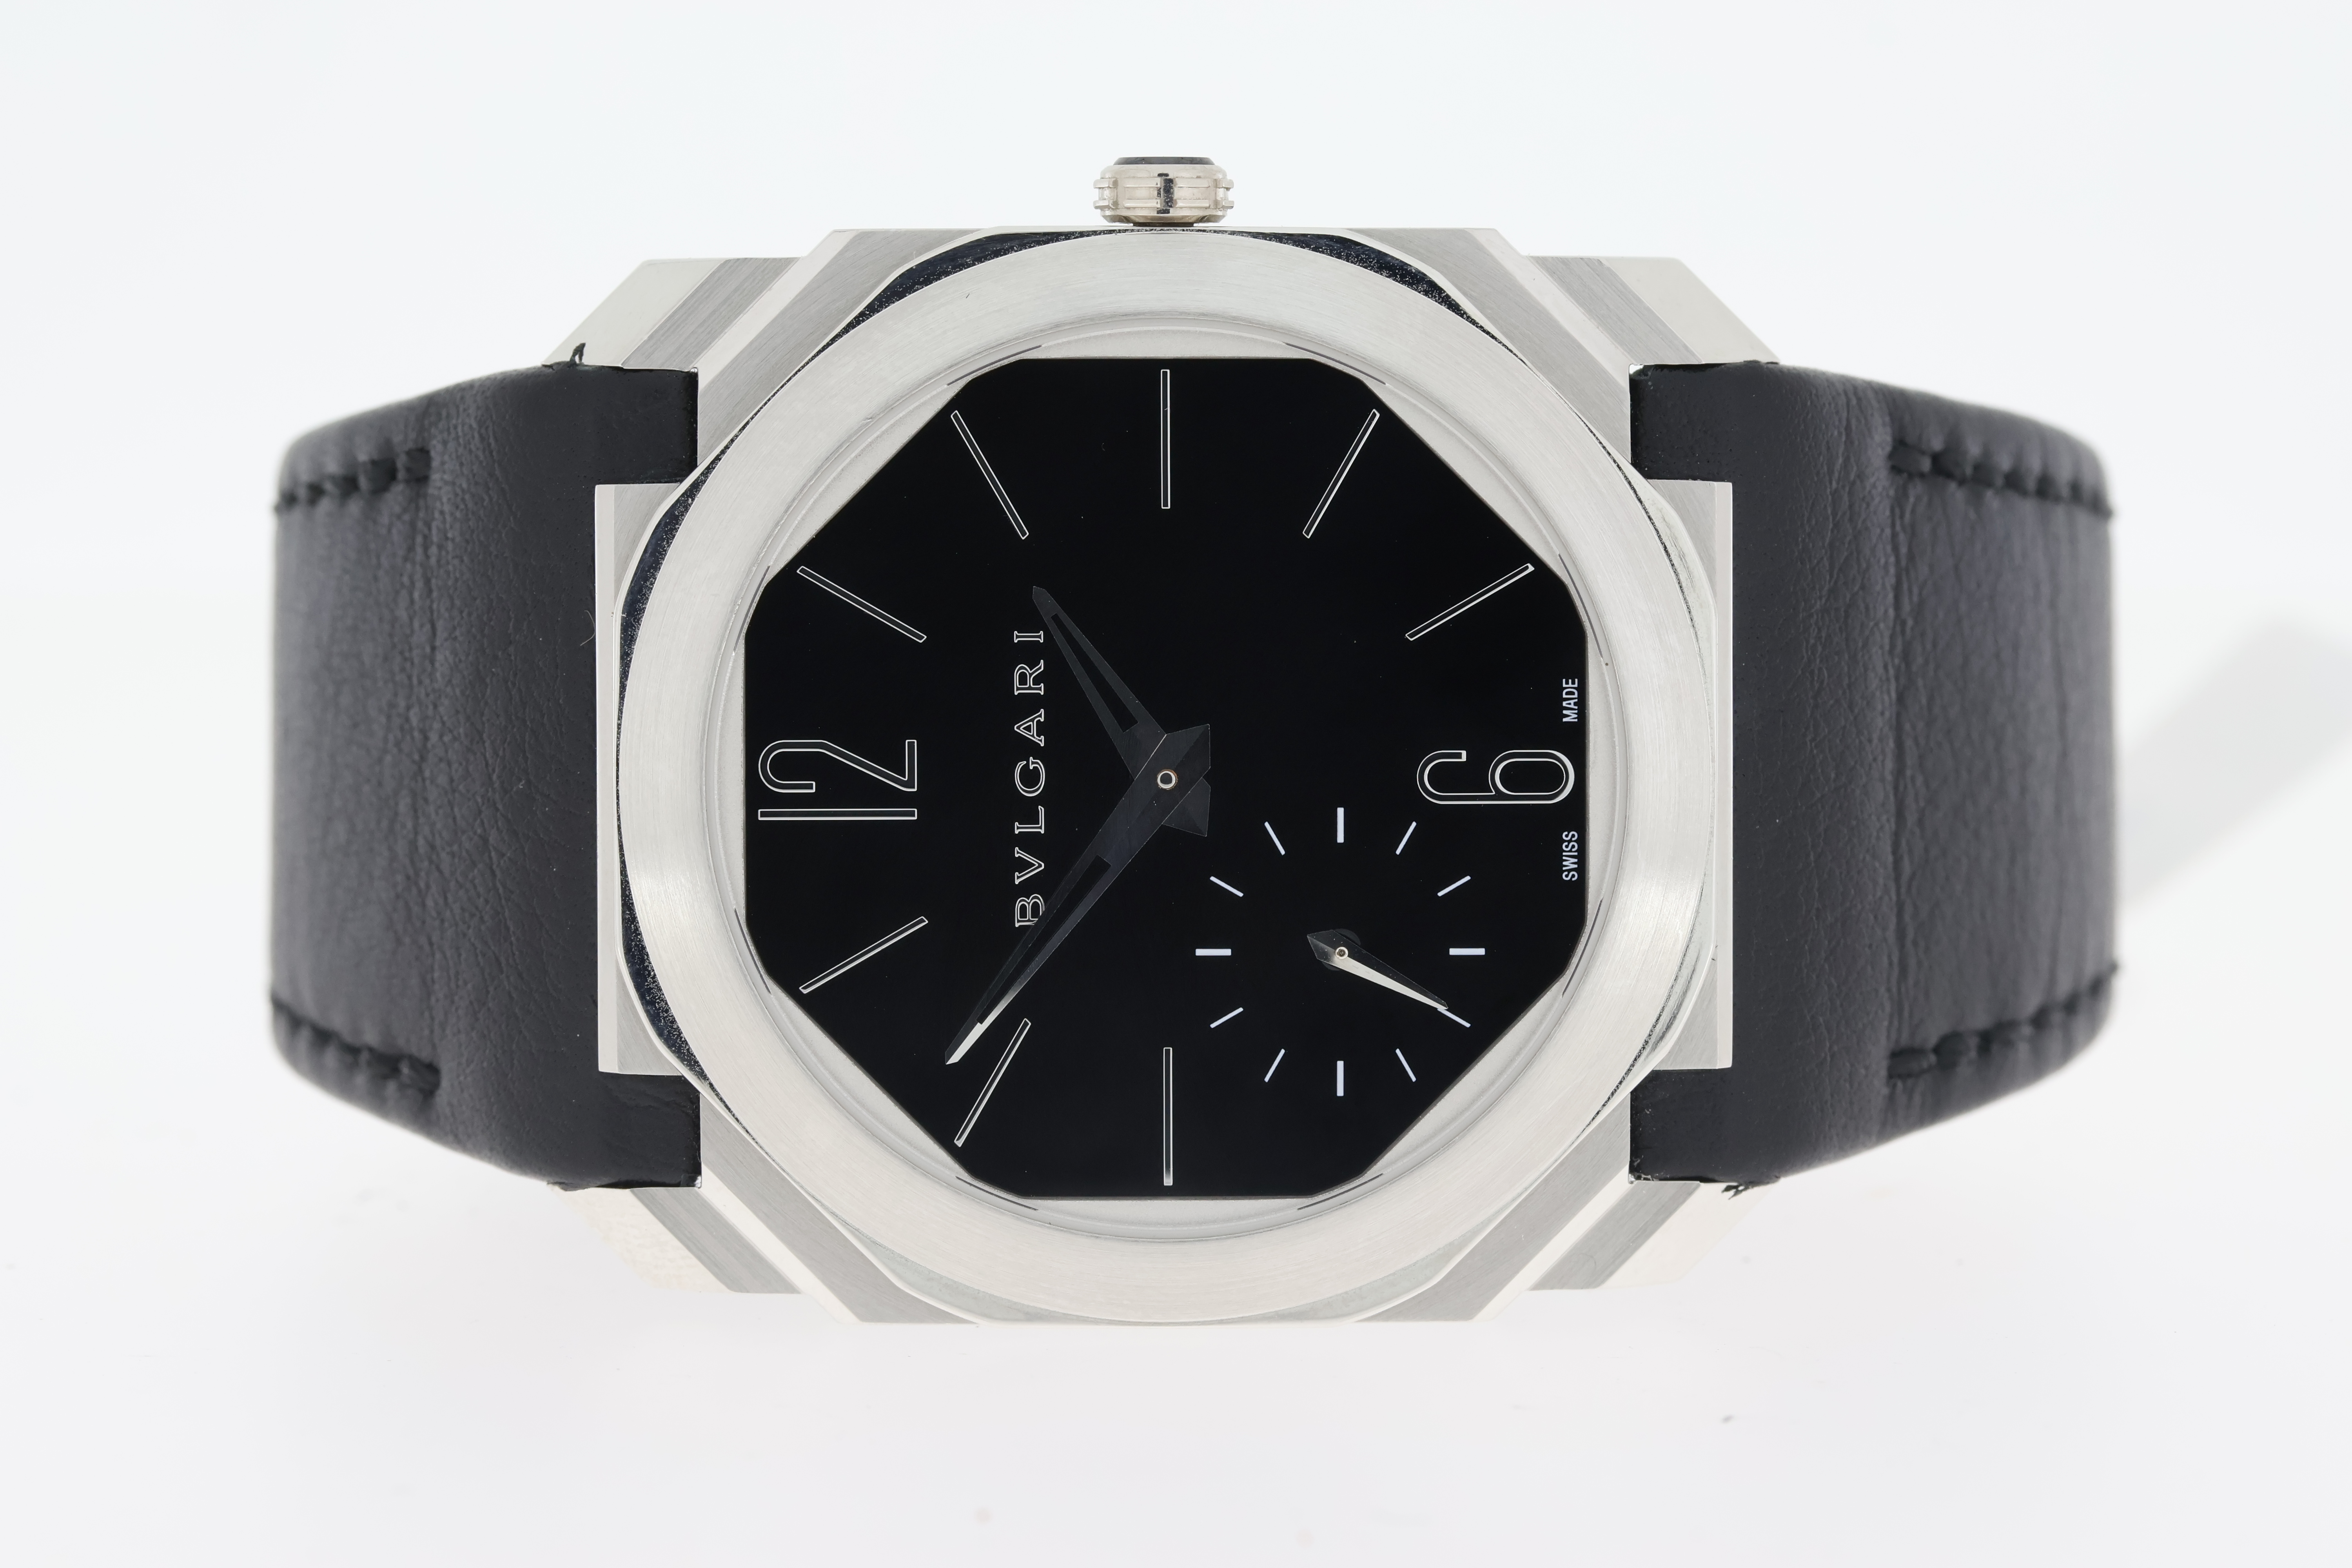 Bulgari Octo Finissimo Ultra Thin Platinum 102028 Manual Wind with Box and Papers - Image 2 of 5